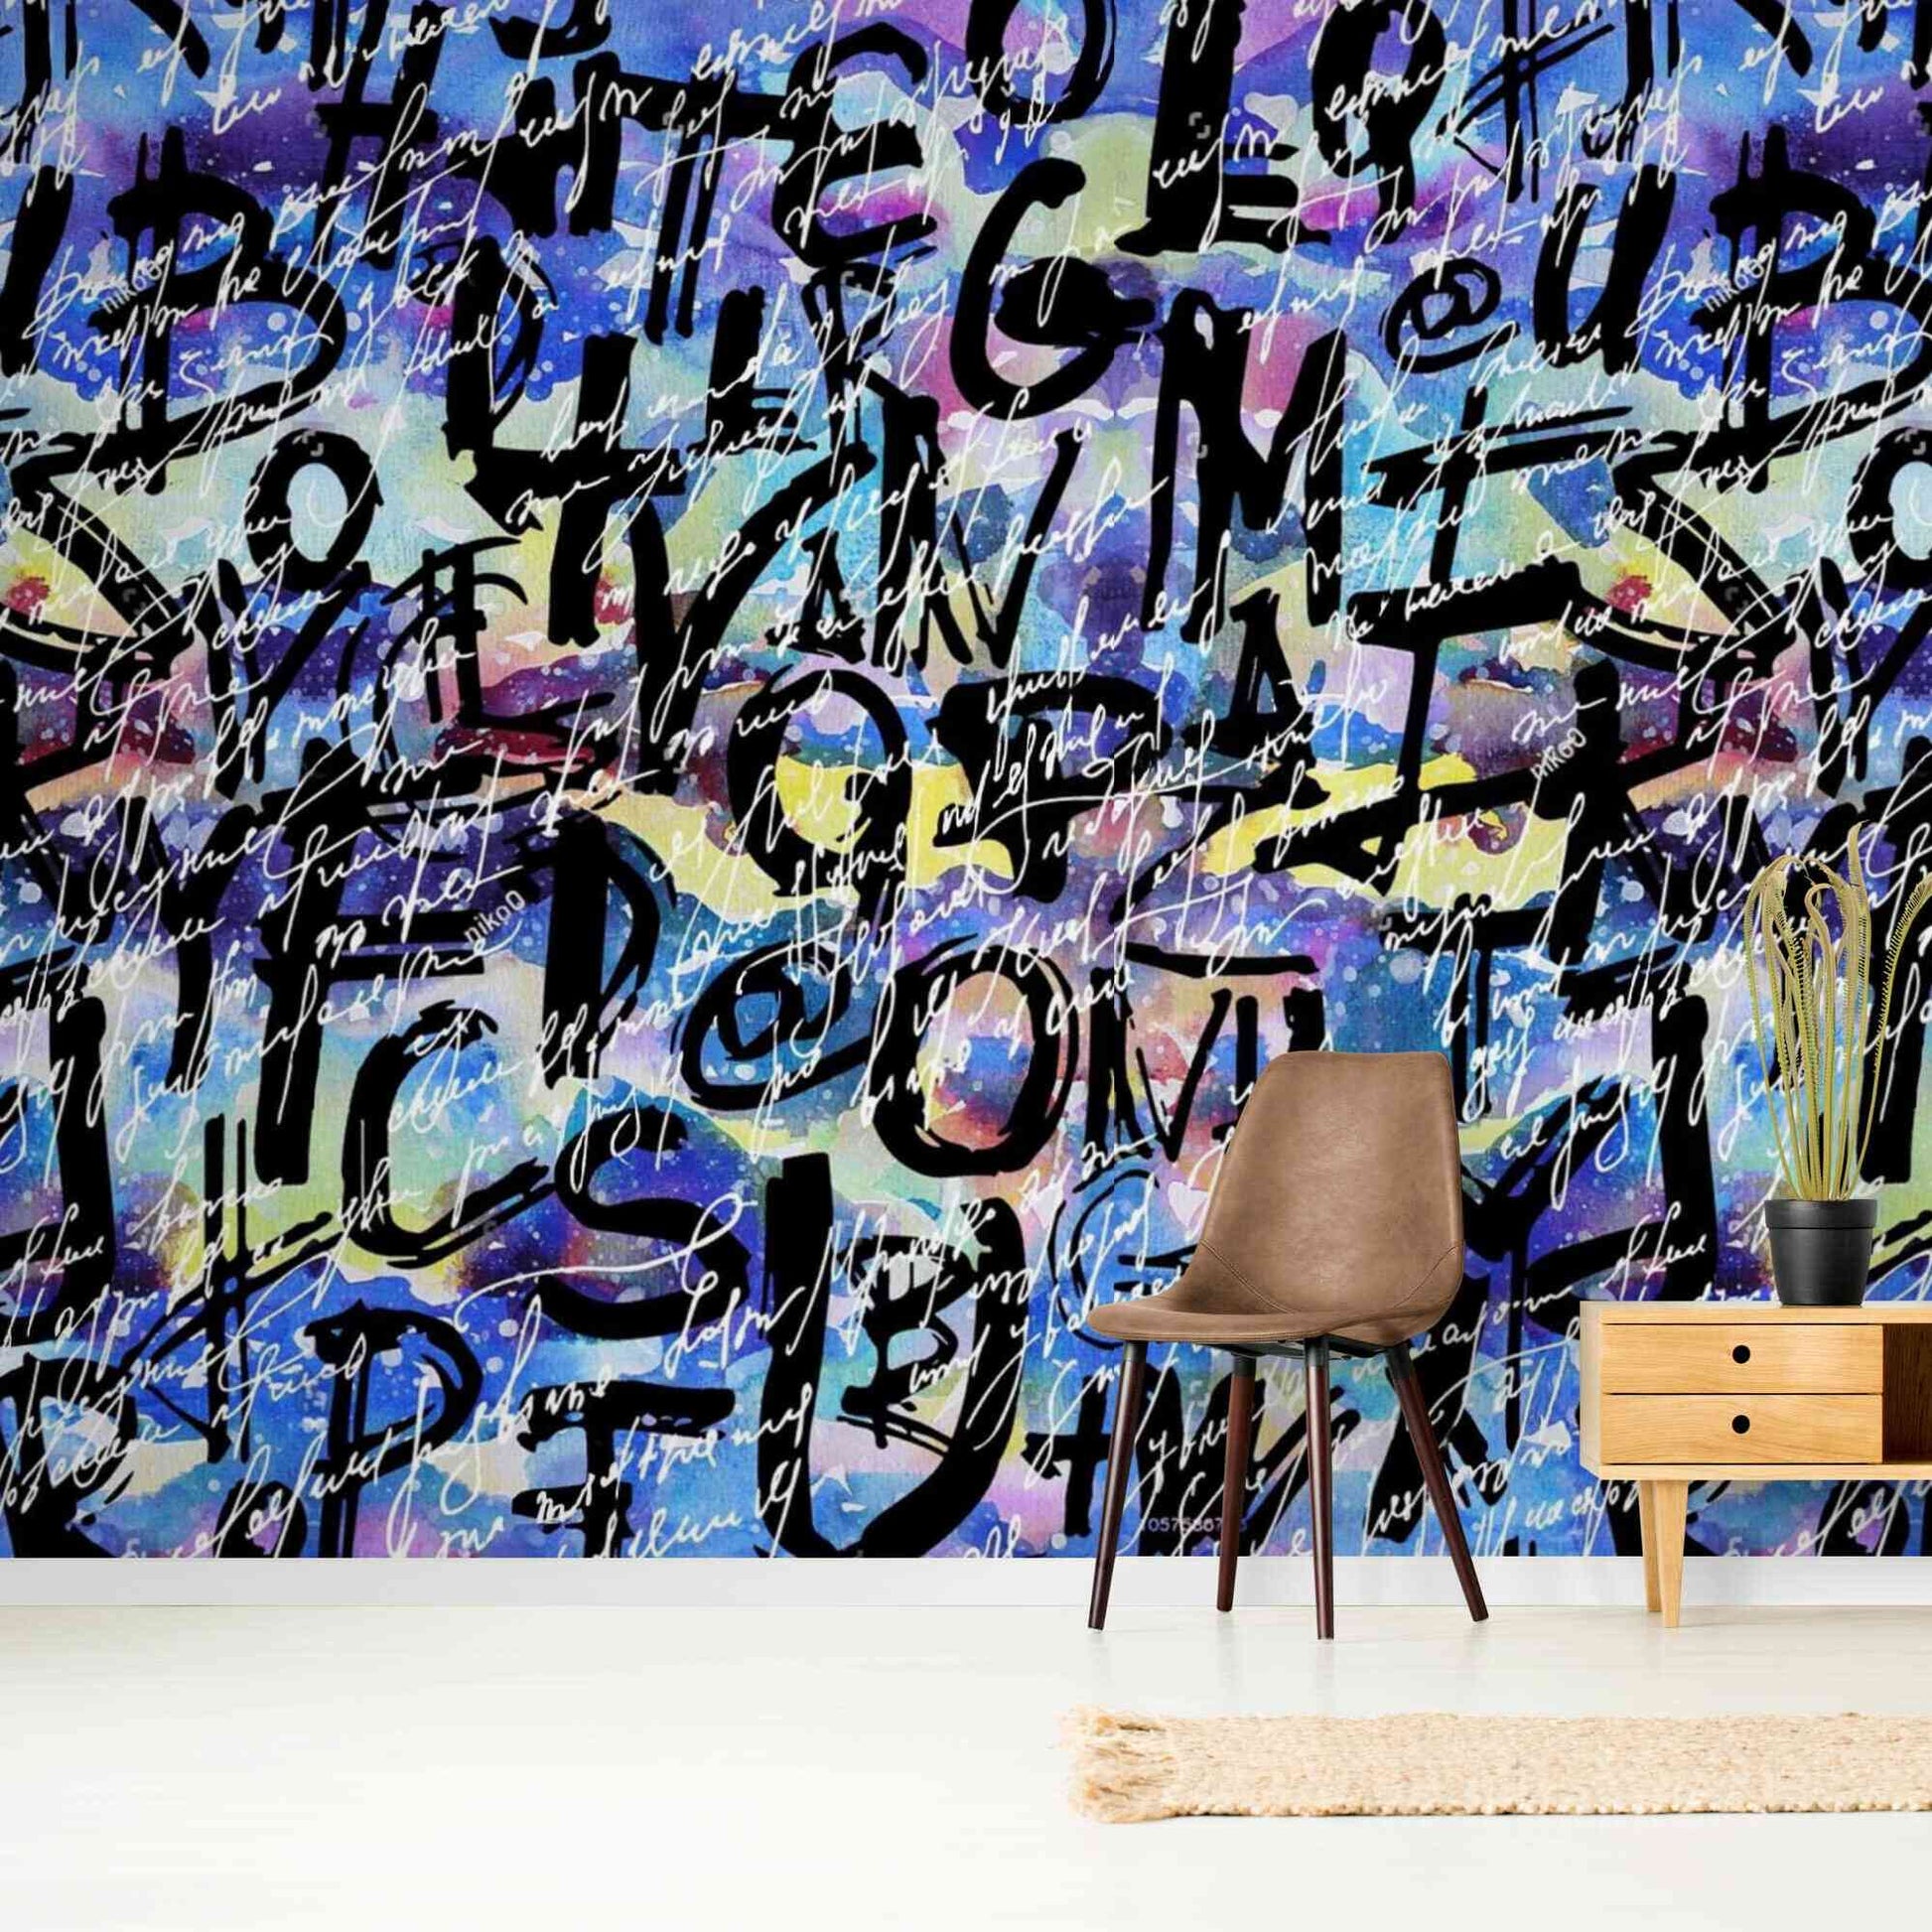 A close-up image of a wallpaper with a blue background and a graffiti-inspired design in shades of white and black. The pattern consists of irregular shapes and lines, creating a chaotic yet artistic effect. The wallpaper is peel and stick, making it easy to install and remove without damaging the wall surface.